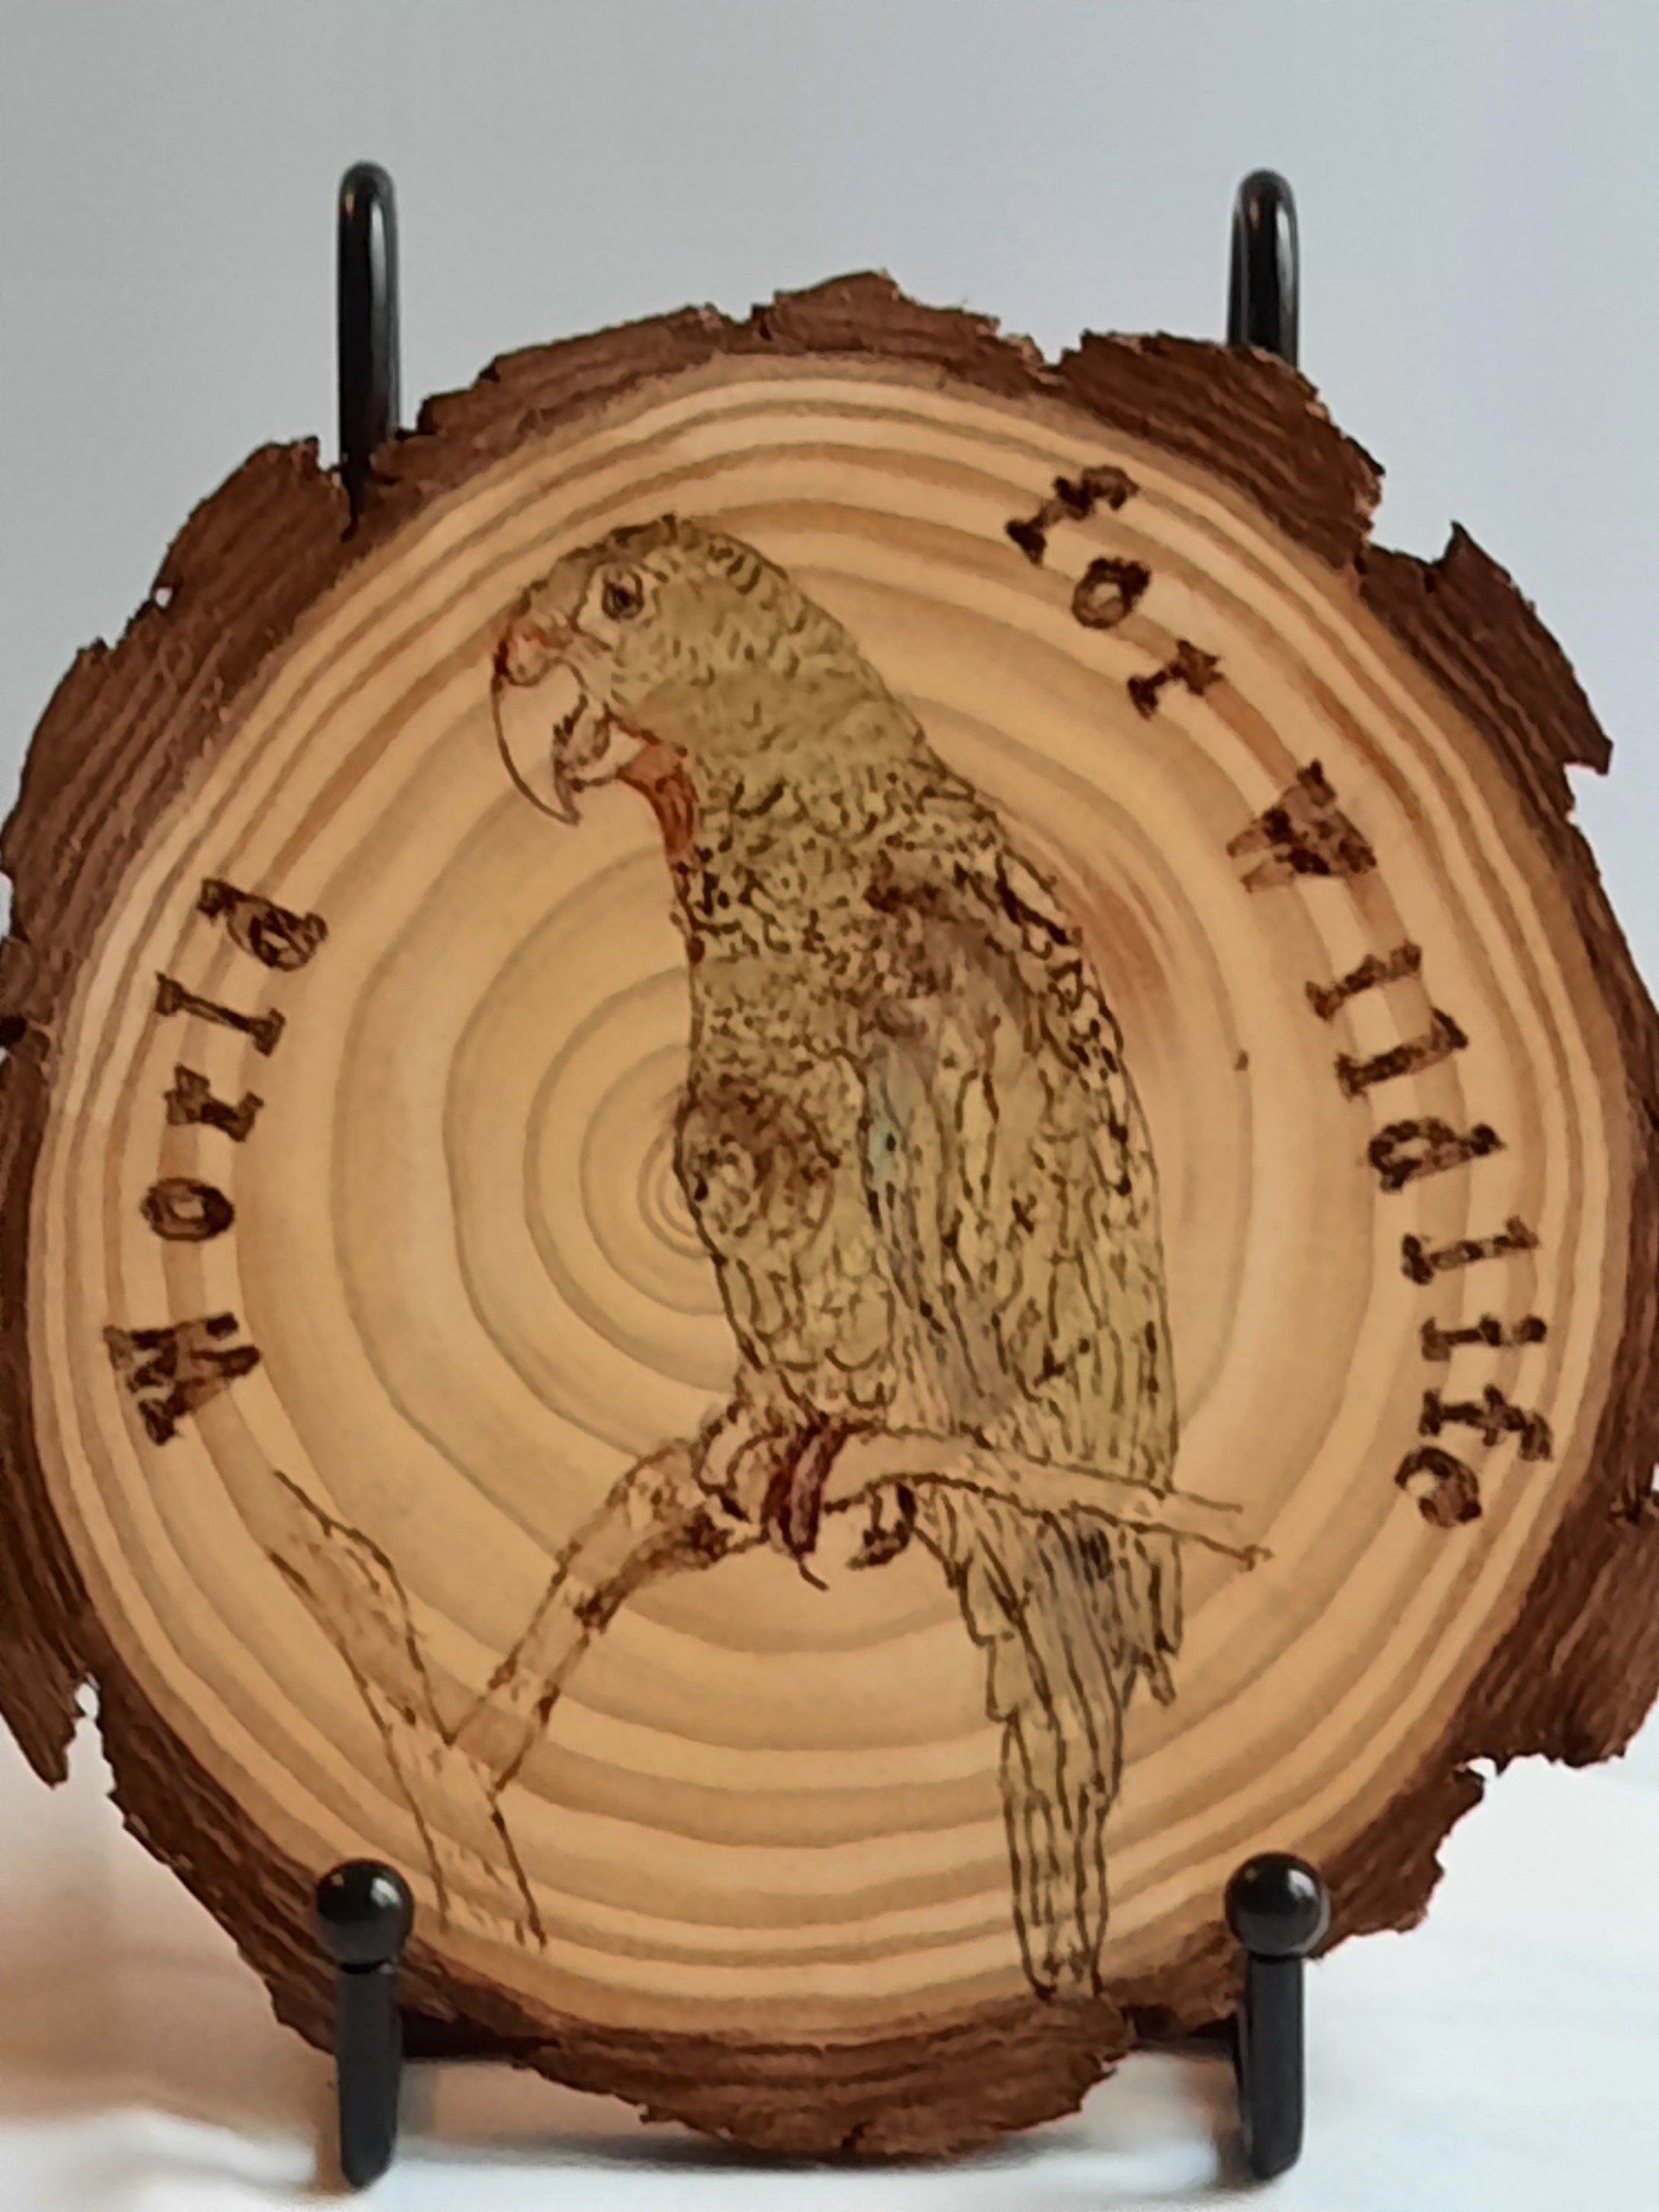 World, wildlife, conservation, bird, parrot, coaster, plaque, gift, wood, pyrography